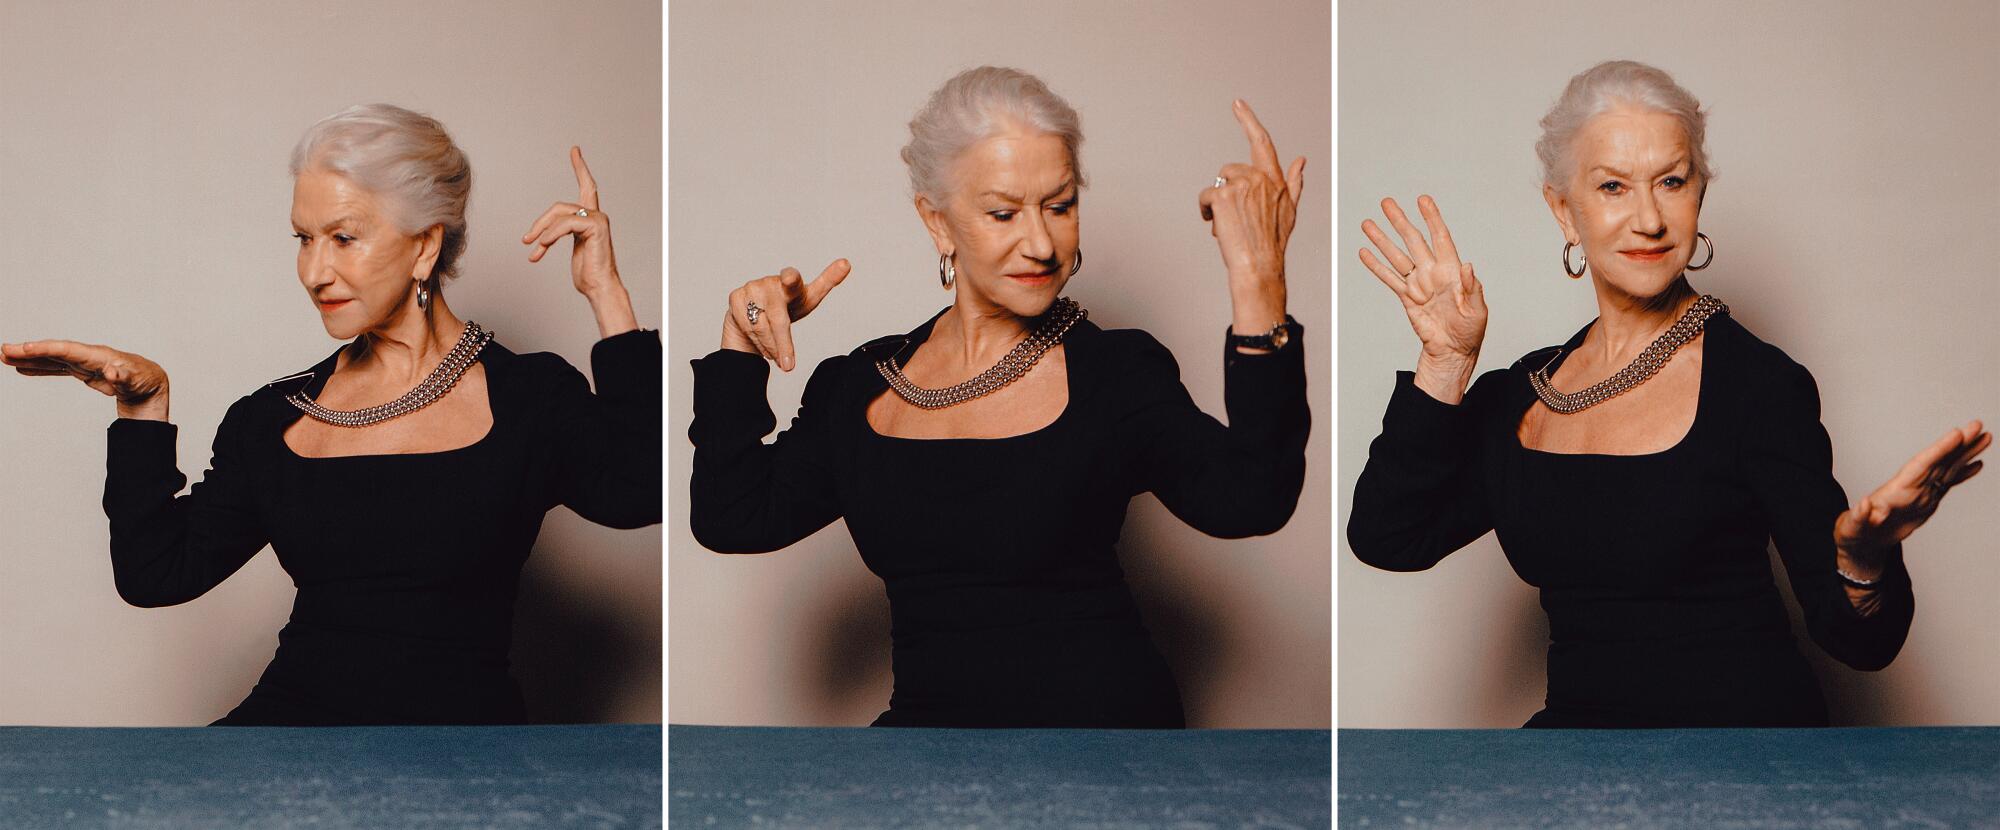 Helen Mirren moves her arms in different ways for a portrait shoot.